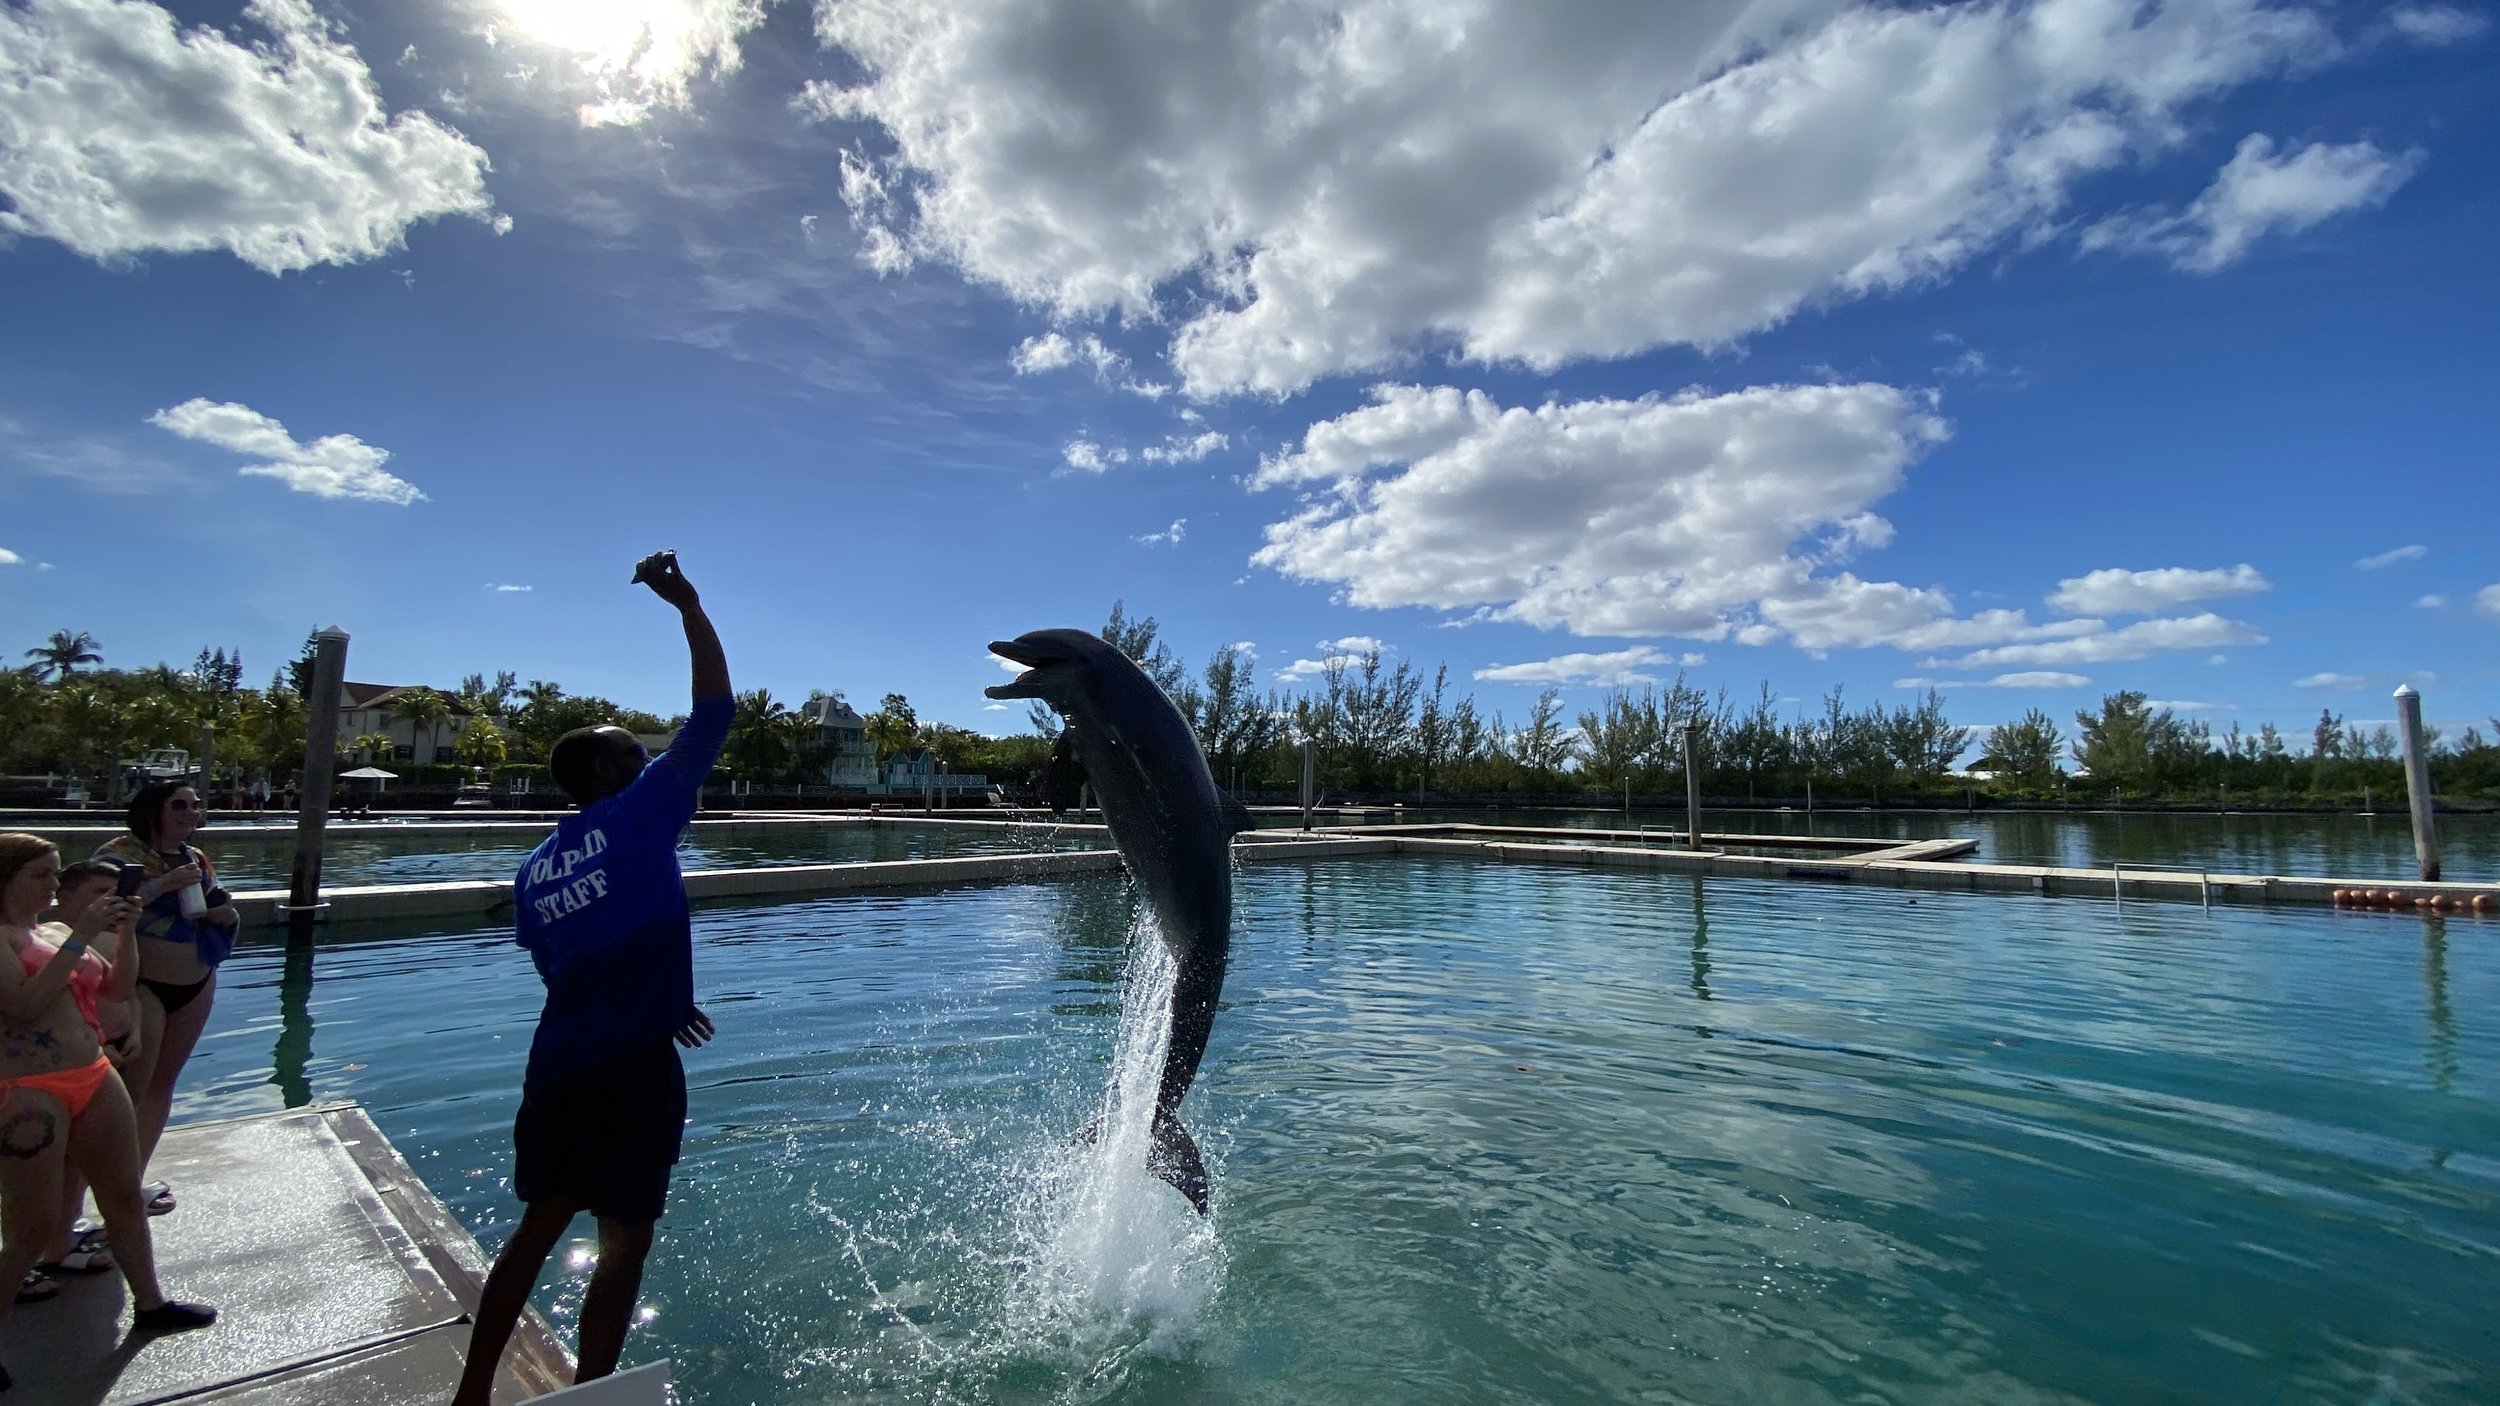 MM40 Page 16 to 21 -The Dolphin Experience at Sanctuary Bay 2.jpg